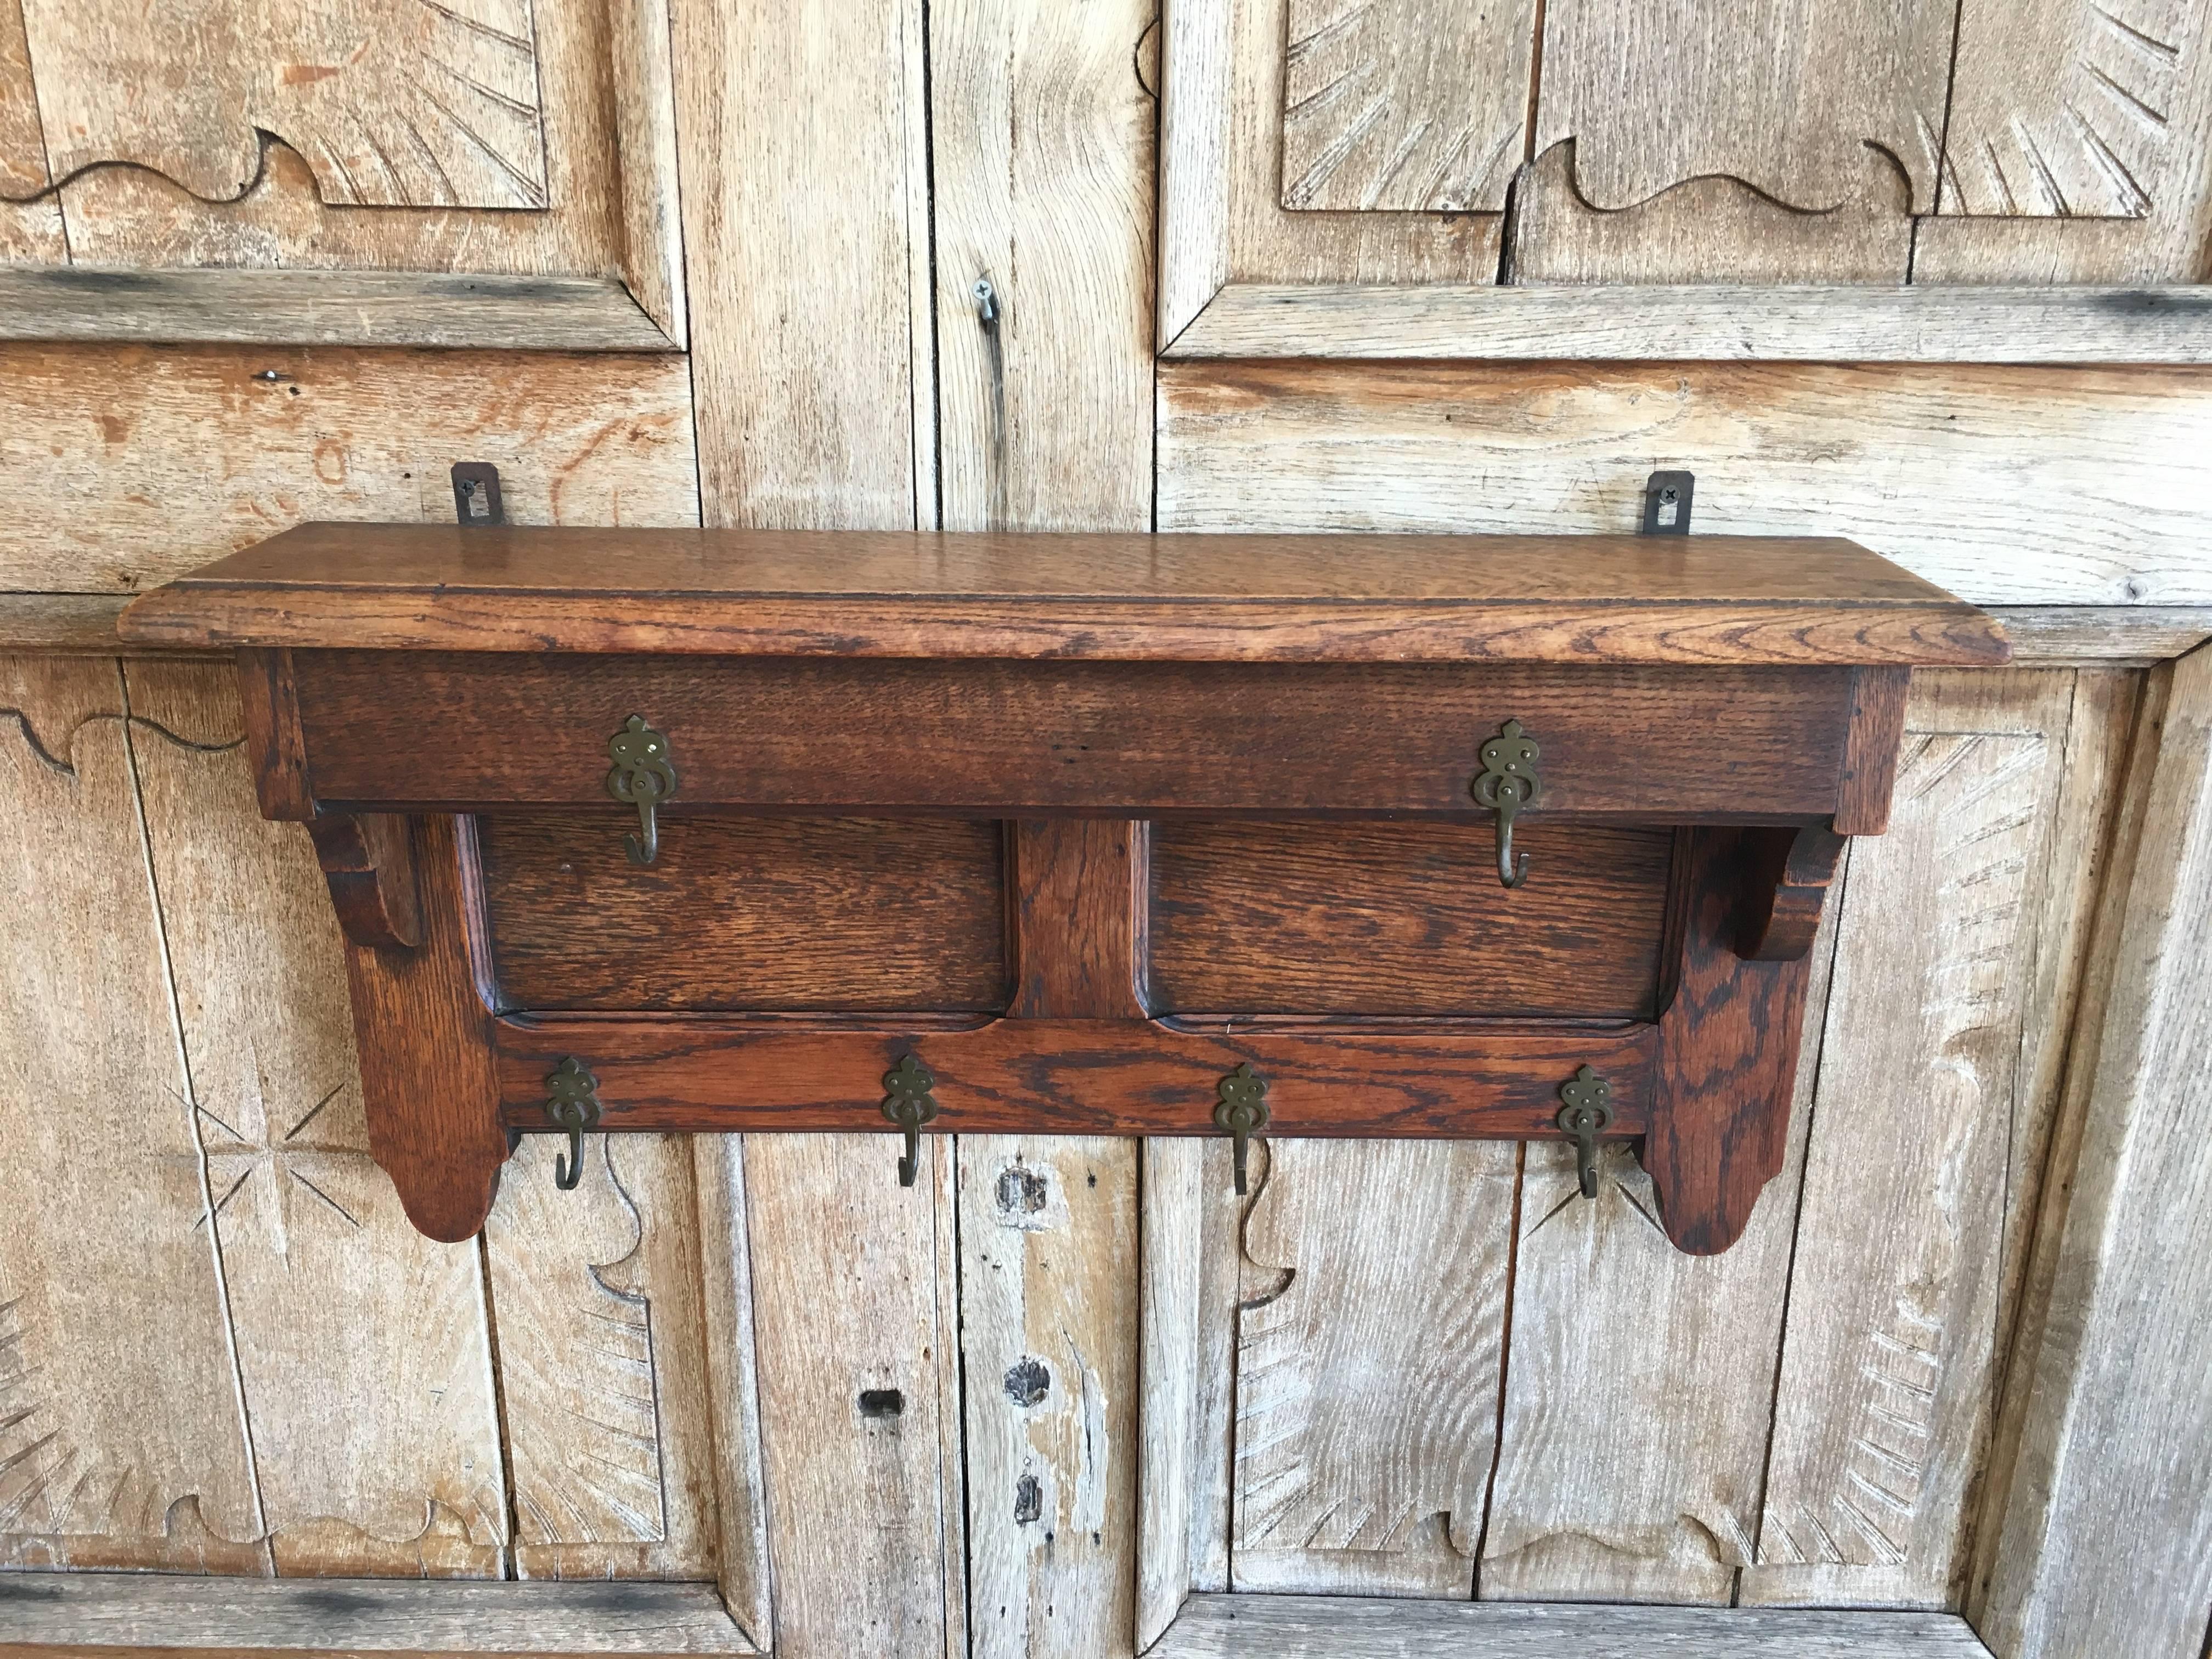 This was originally used for hanging cooking pans (Etagere Casserole) but now they are mostly used for coats, hats and backpacks.